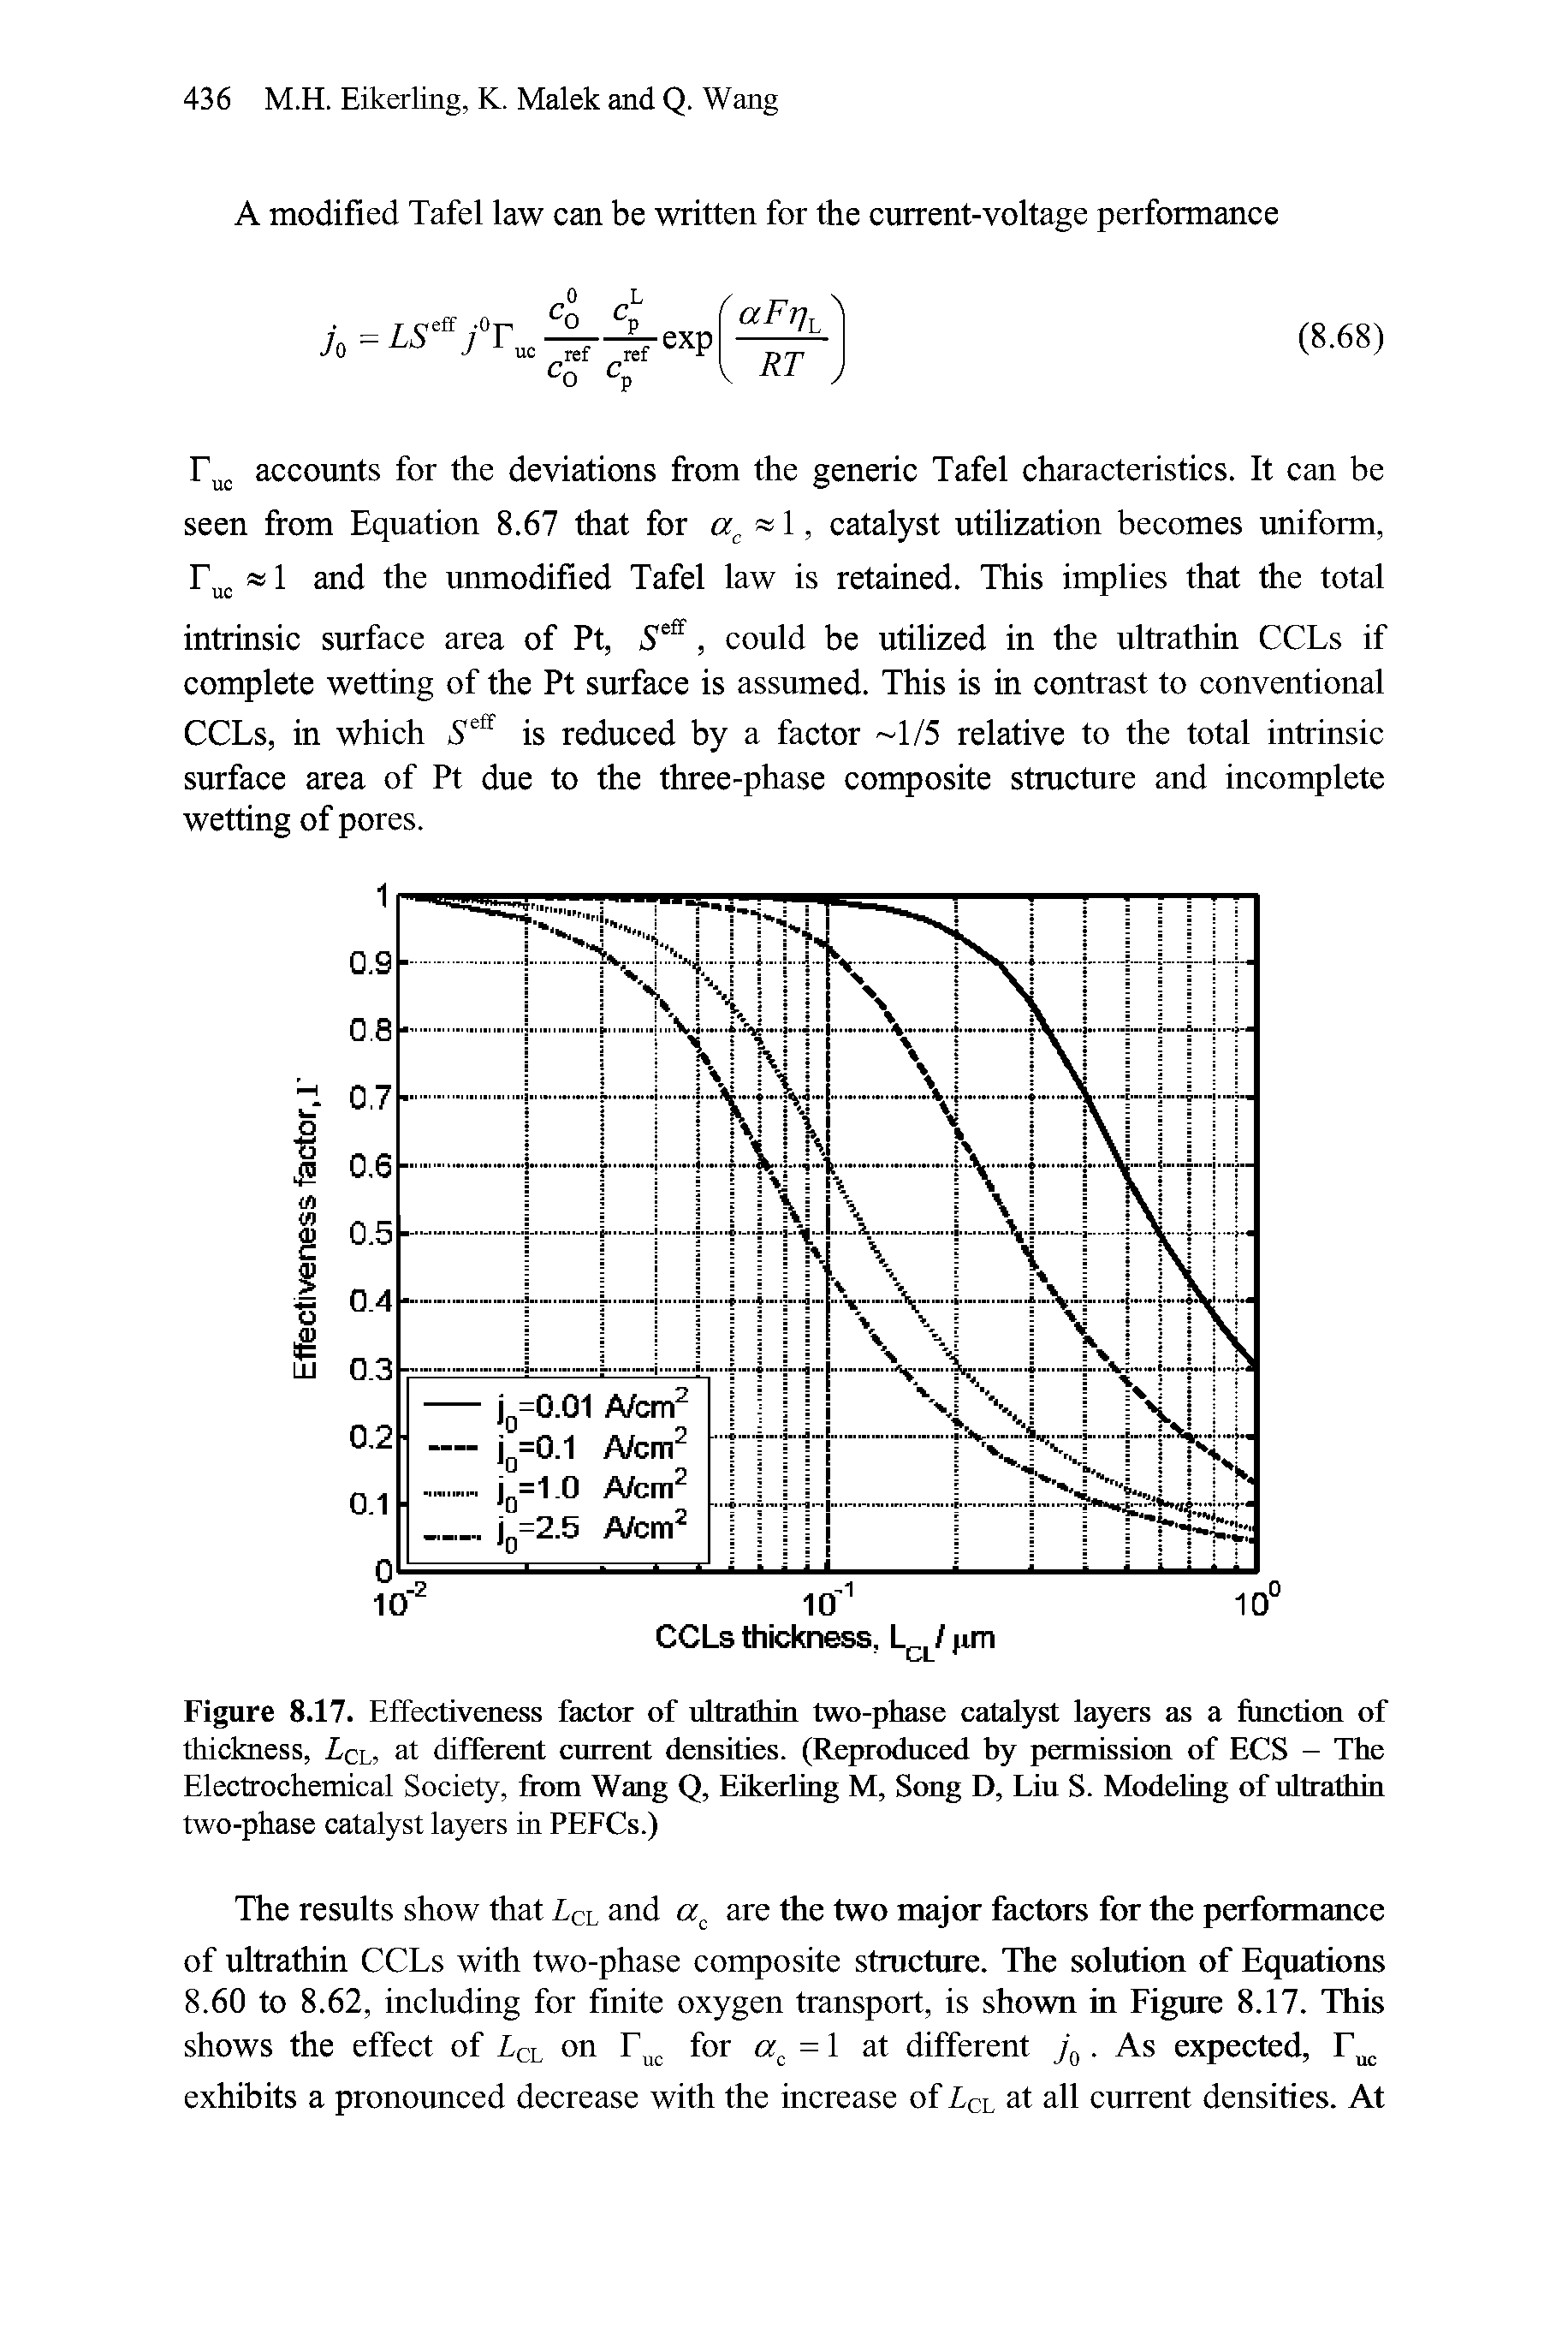 Figure 8.17. Effectiveness factor of ultrathin two-phase catalyst layers as a function of thickness, Lcl. at different current densities. (Reproduced by permission of ECS — The Electrochemical Society, from Wang Q, Eikerling M, Song D, Liu S. Modeling of ultrathin two-phase catalyst layers in PEFCs.)...